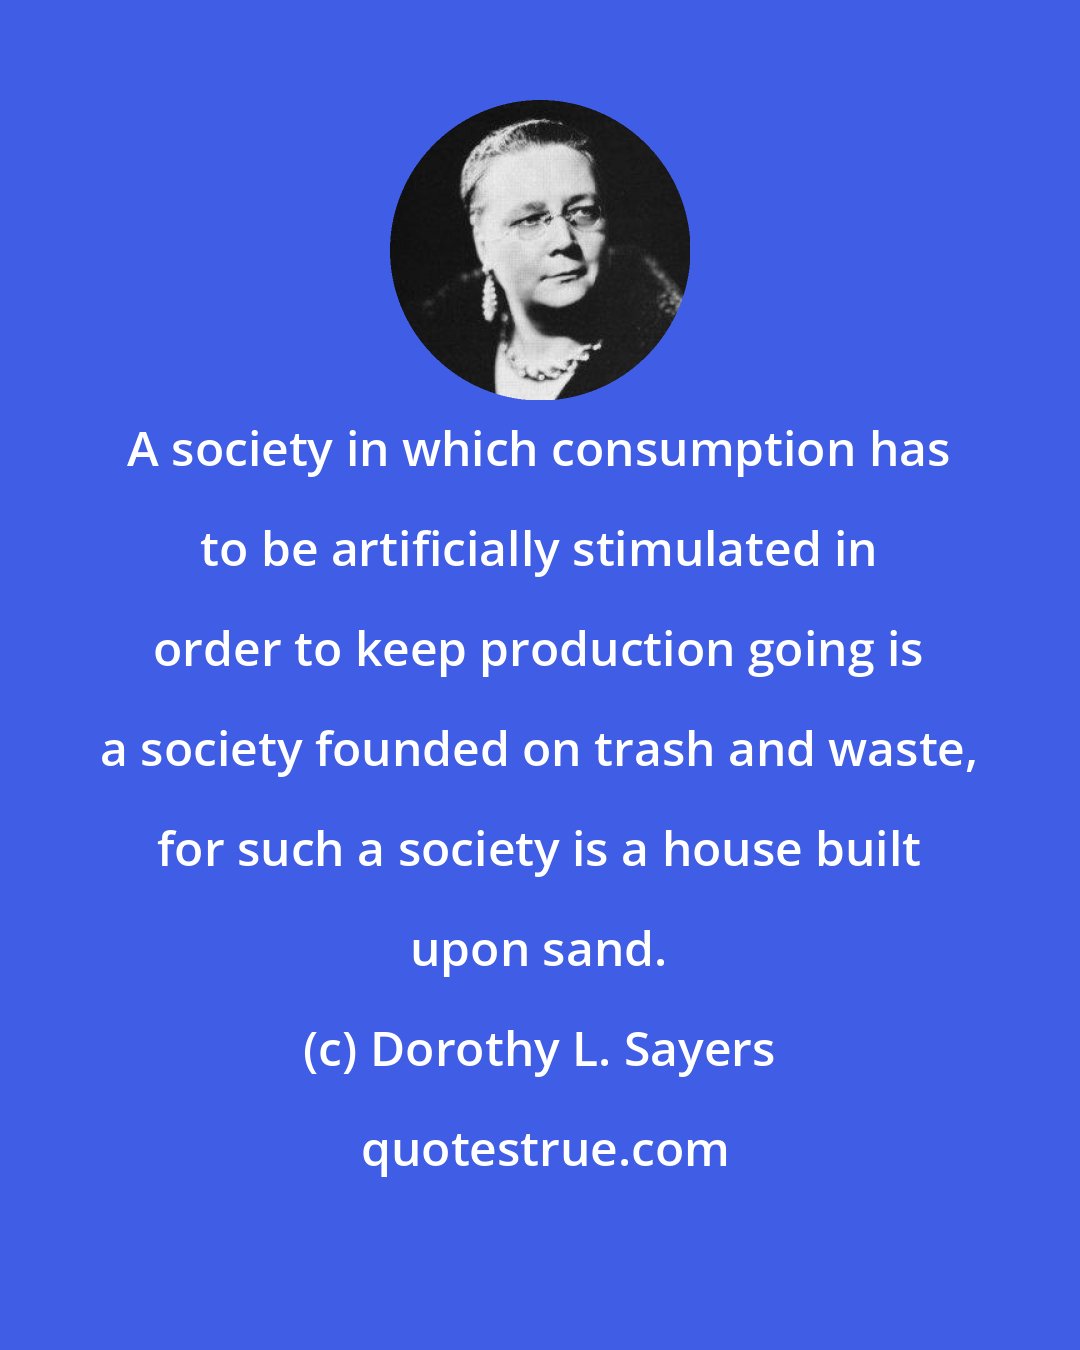 Dorothy L. Sayers: A society in which consumption has to be artificially stimulated in order to keep production going is a society founded on trash and waste, for such a society is a house built upon sand.